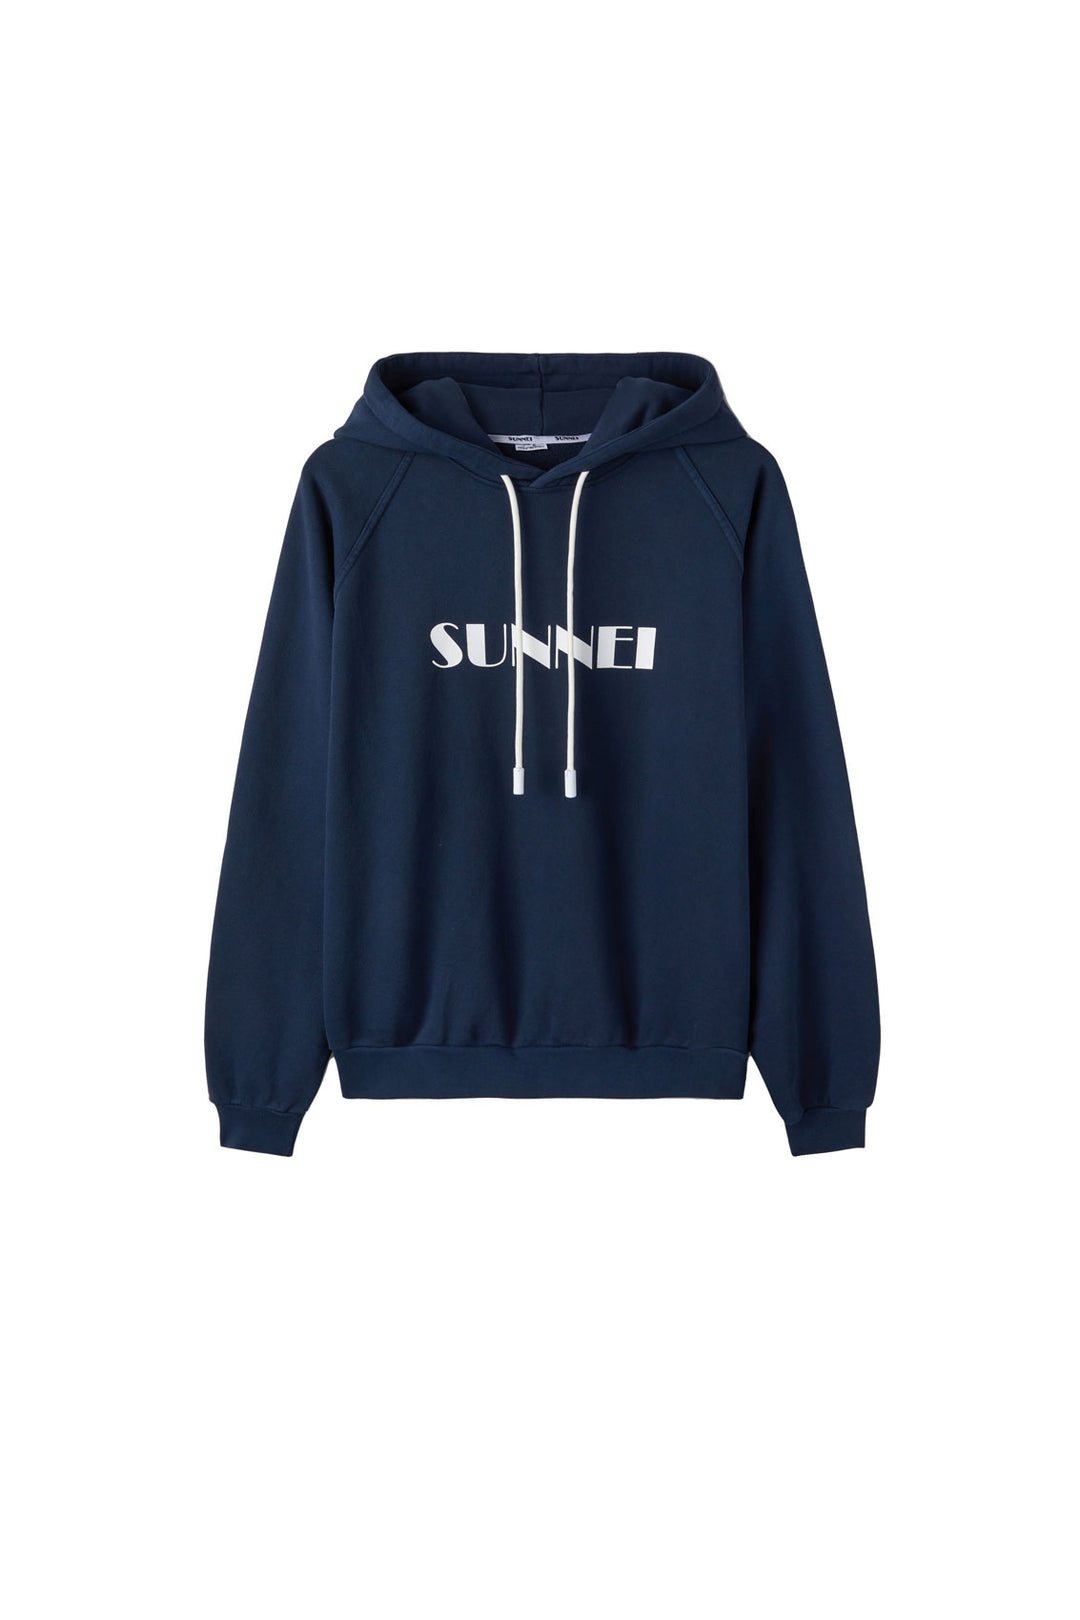 BLUE HOODIE WITH LOGO - 1